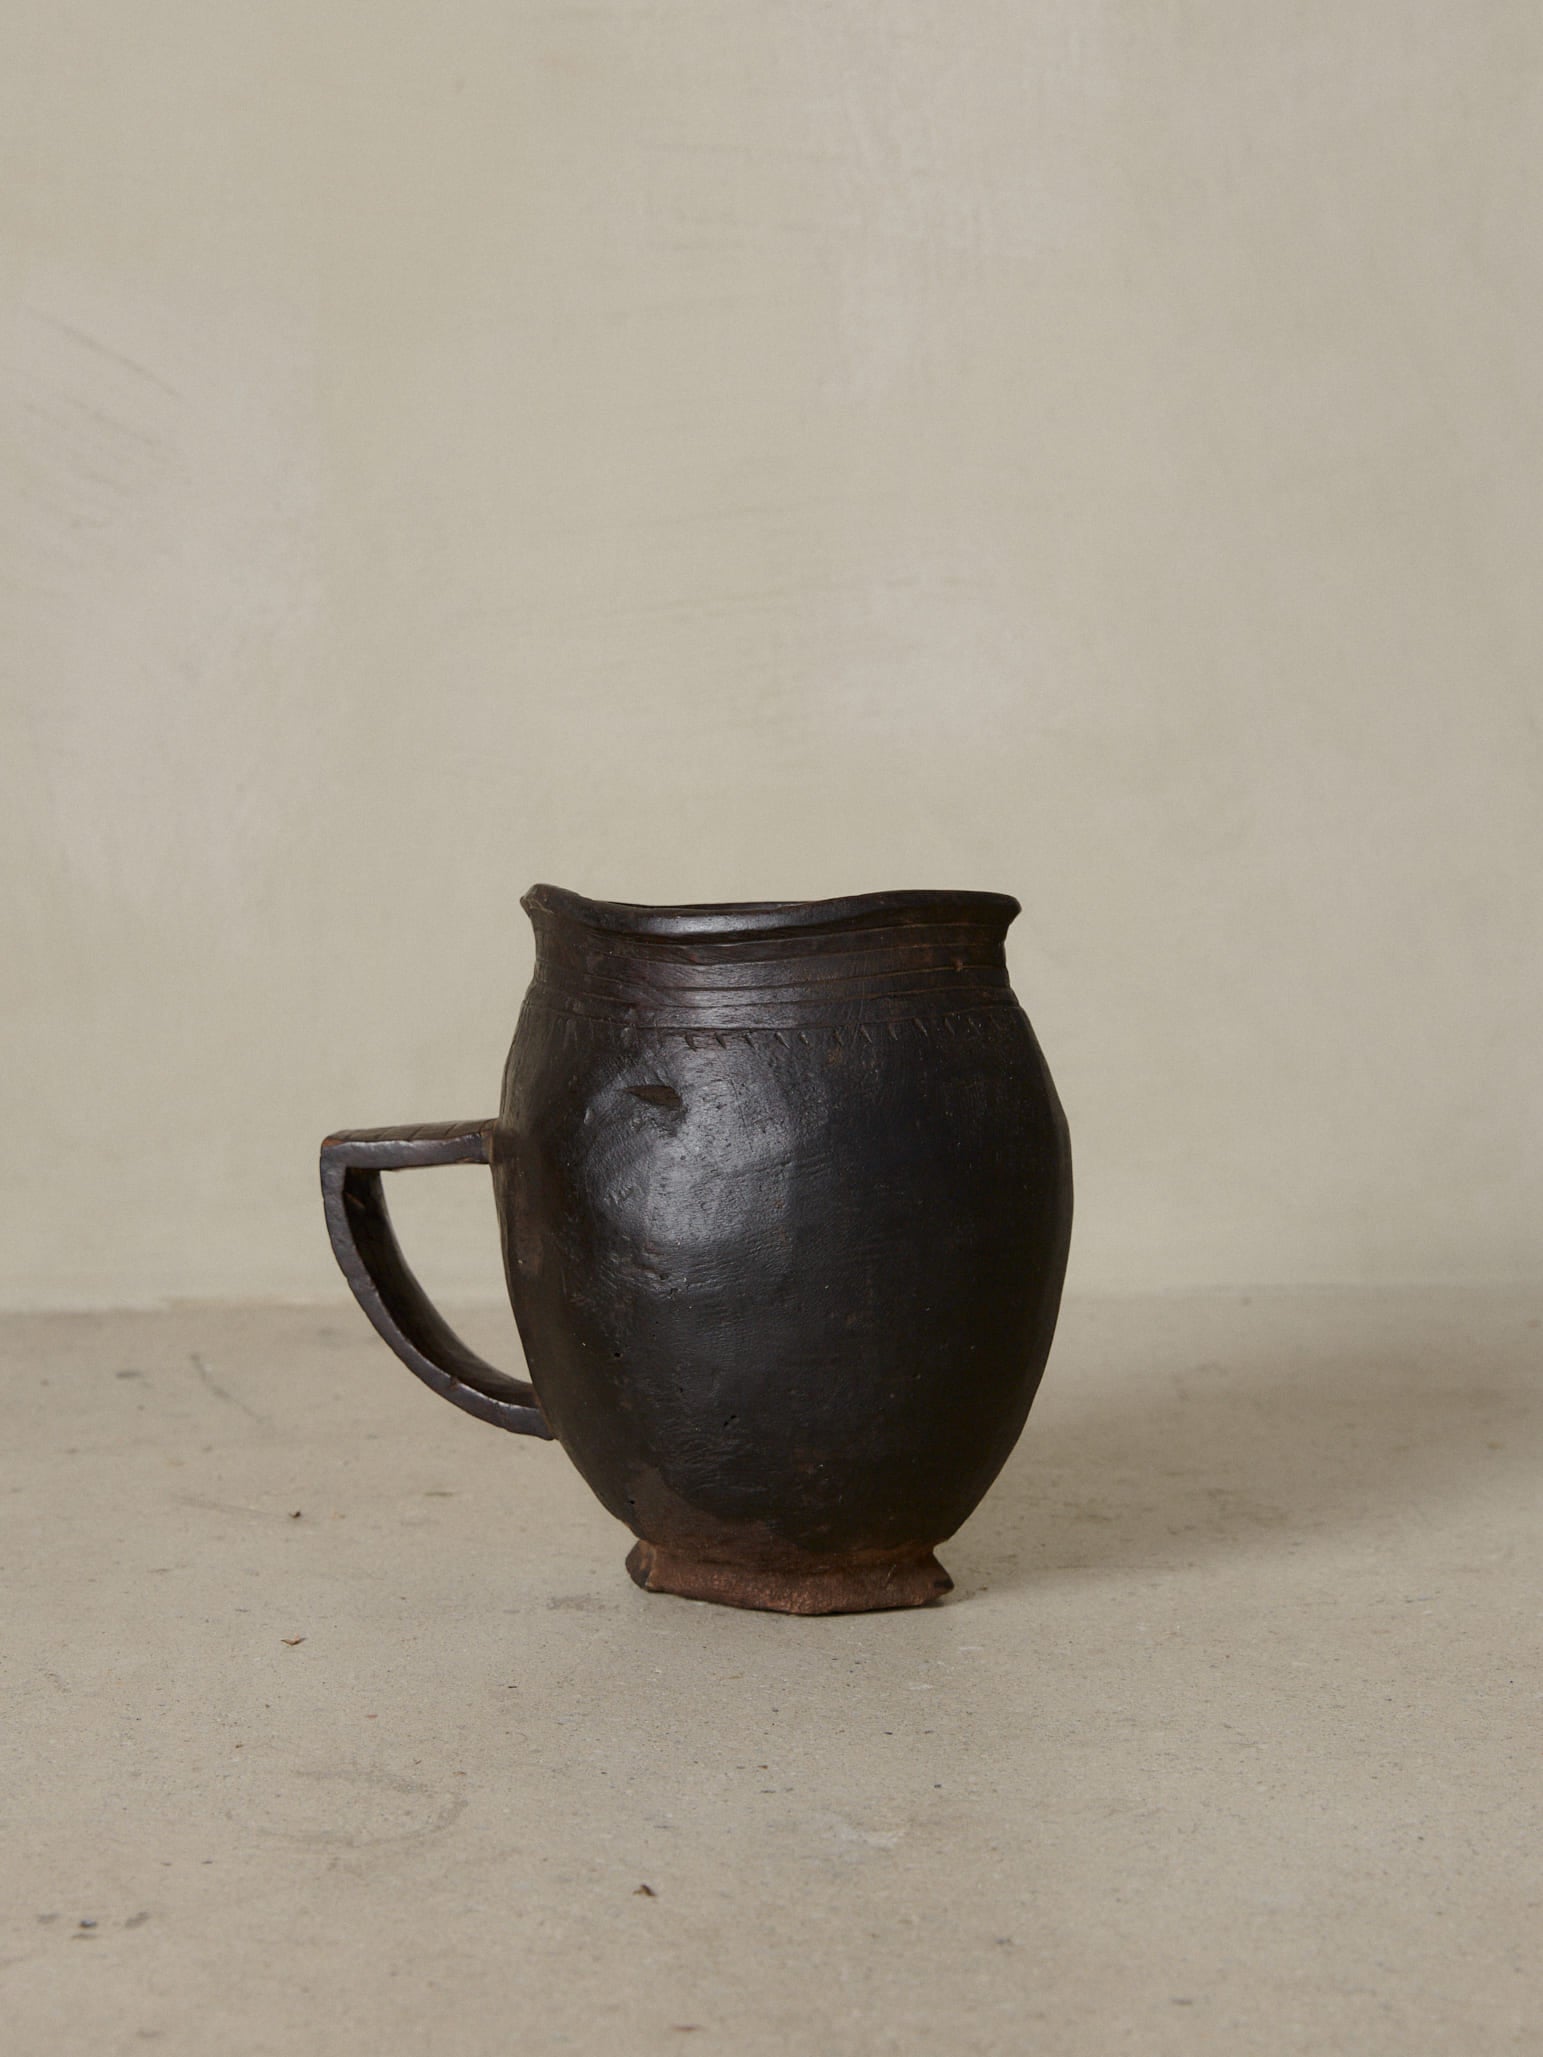 Anton Pitcher. Rare vintage find. Small, hand carved milk pitcher with artful etching details in dark natural wood. 